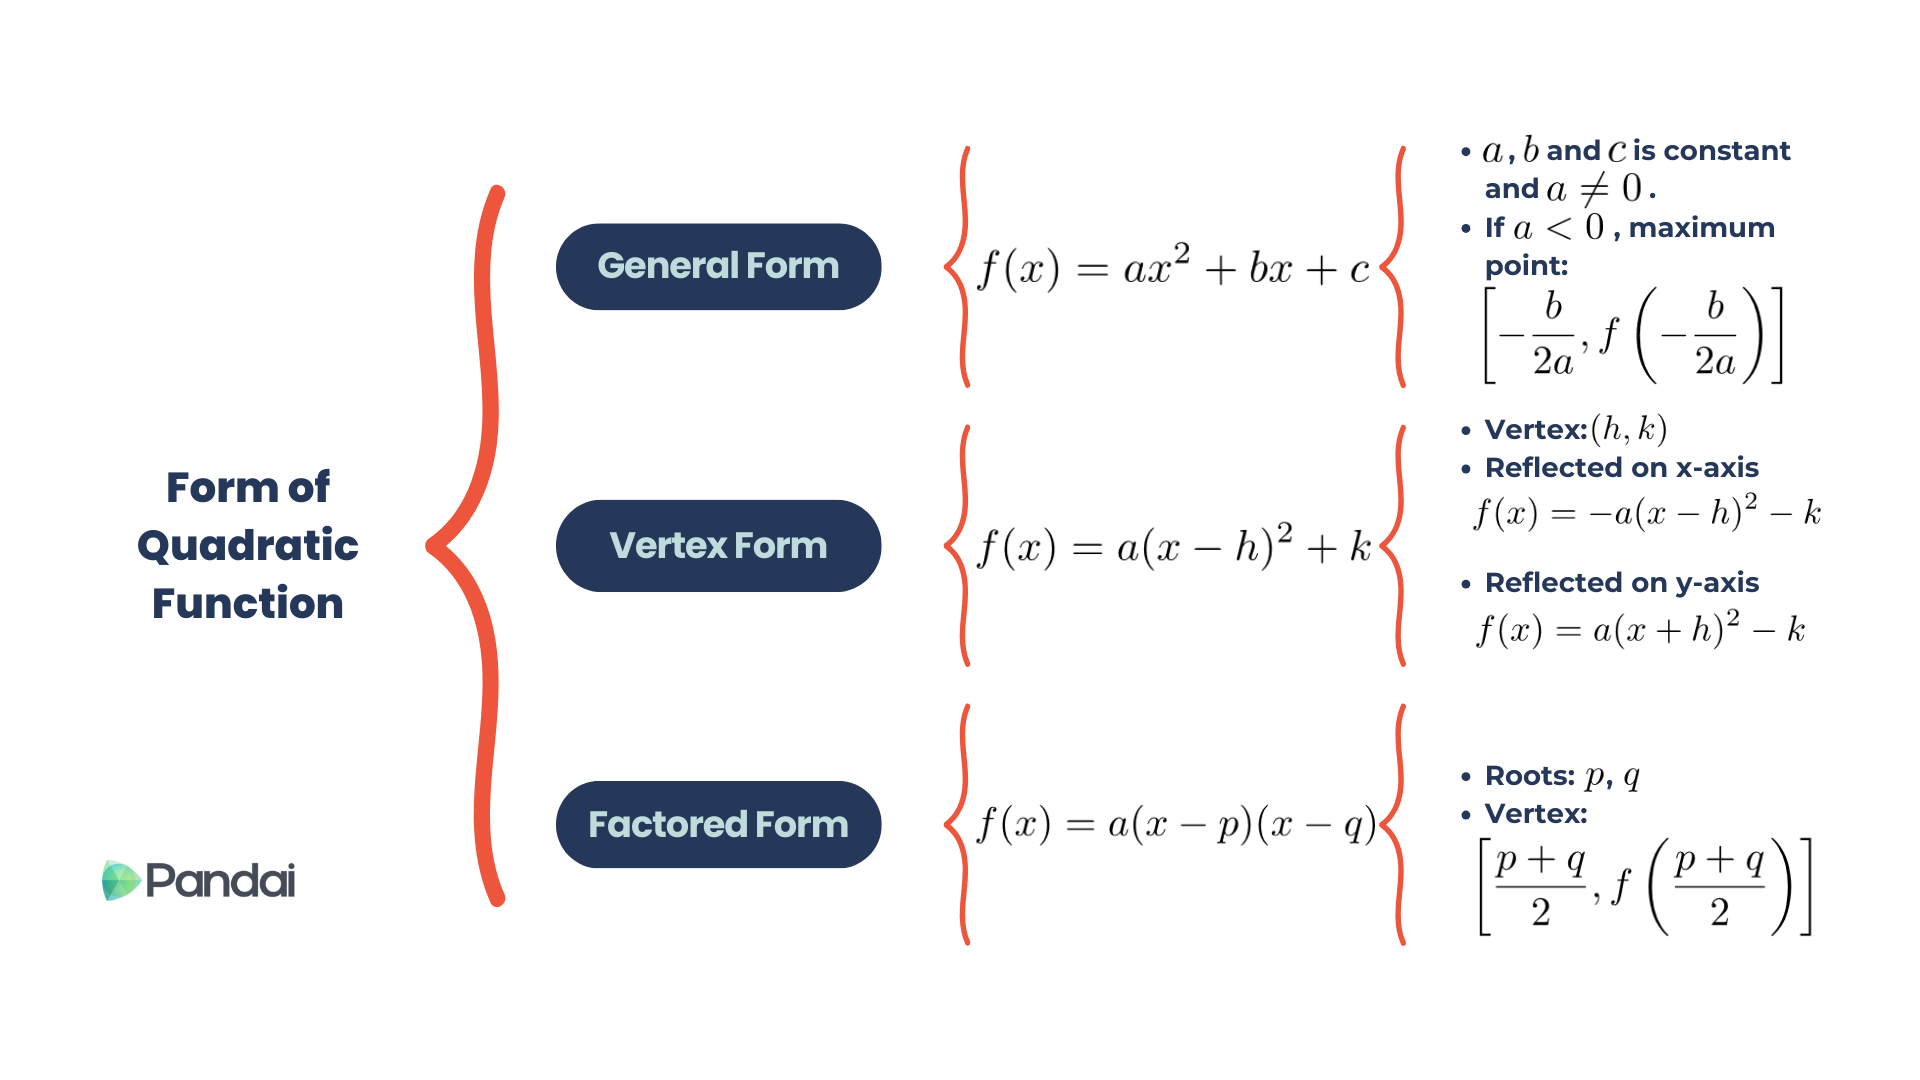 A visual representation of a quadratic function's form and its properties.